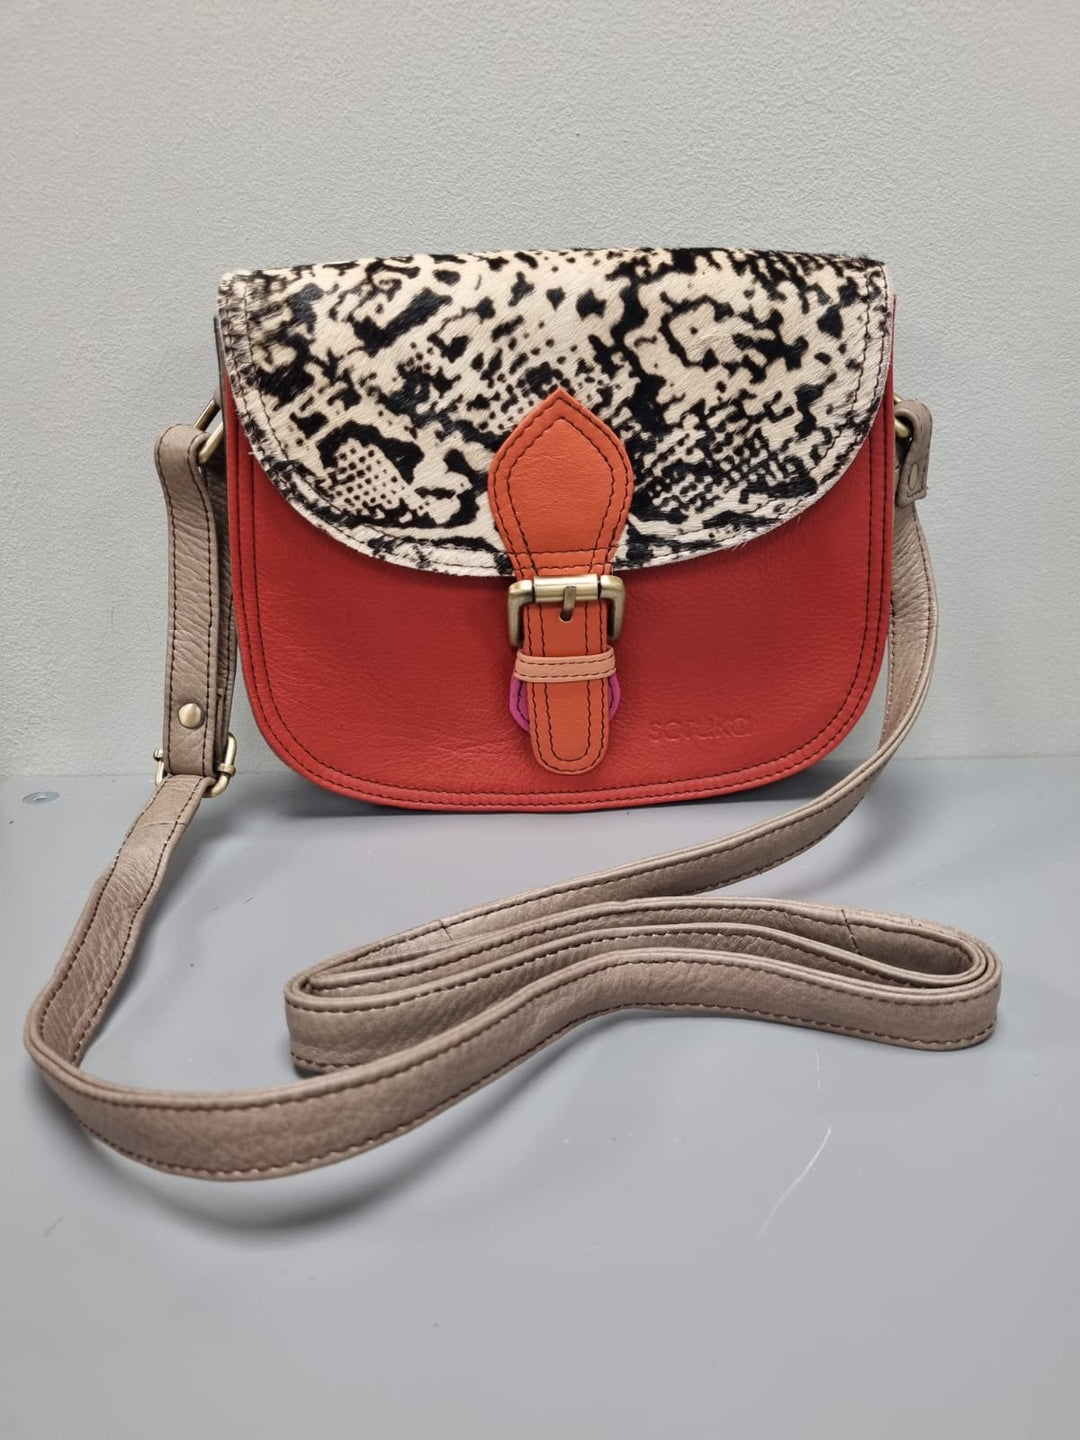 Ally Leather Cross Body Bag - Red Leather & Animal Print